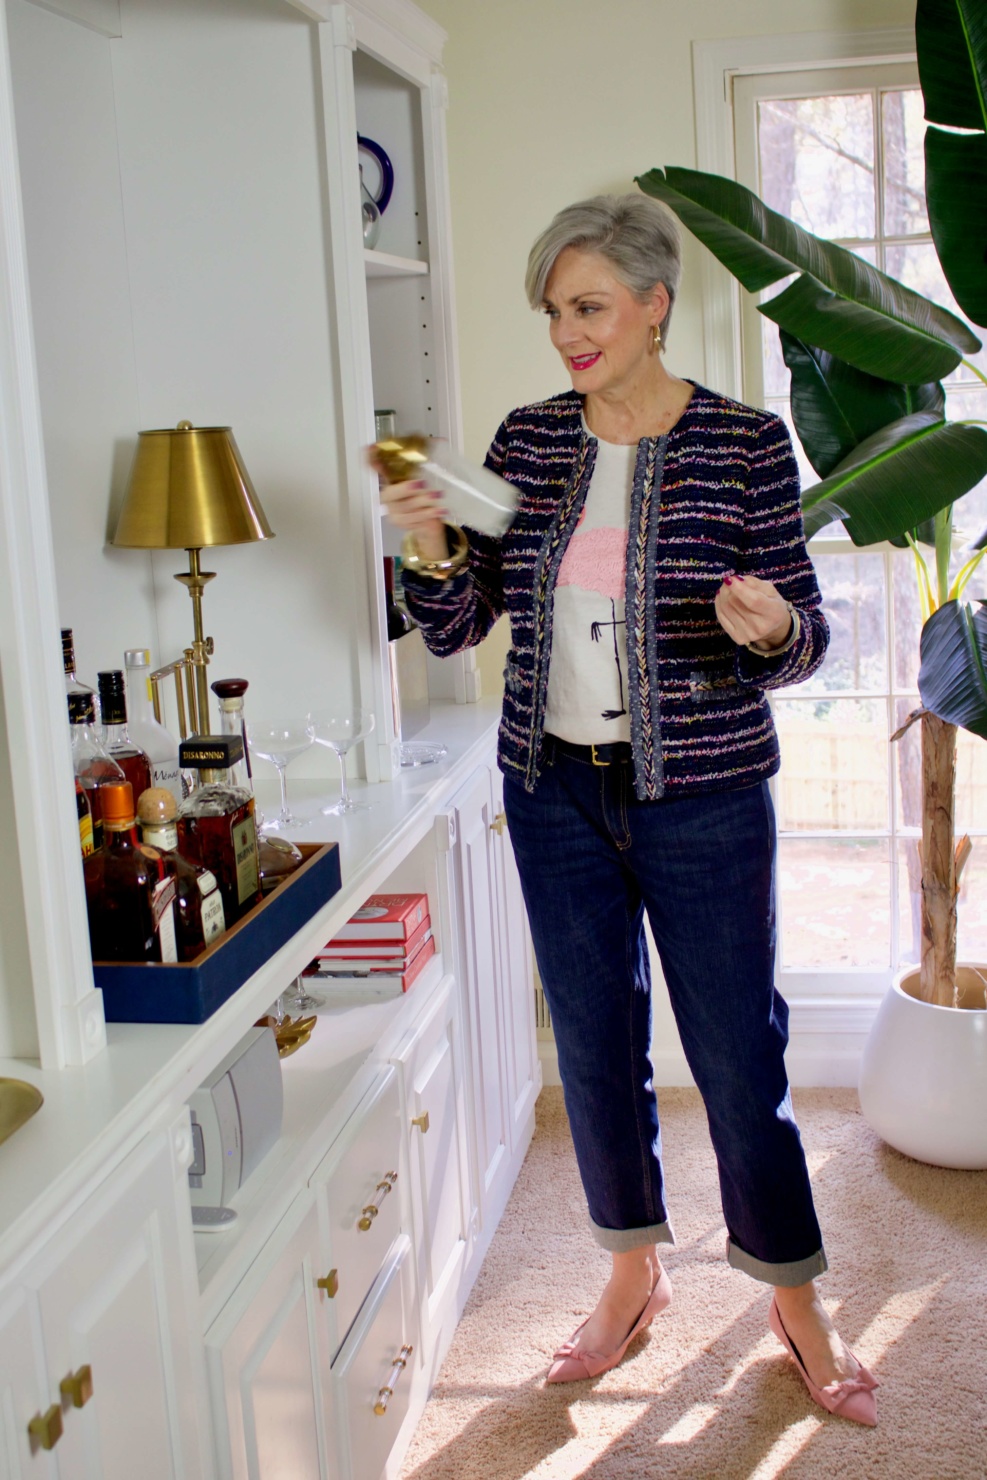 beth from Style at a Certain Age wears boyfriend jeans, graphic tee, tweed blazer and pink kitten heels